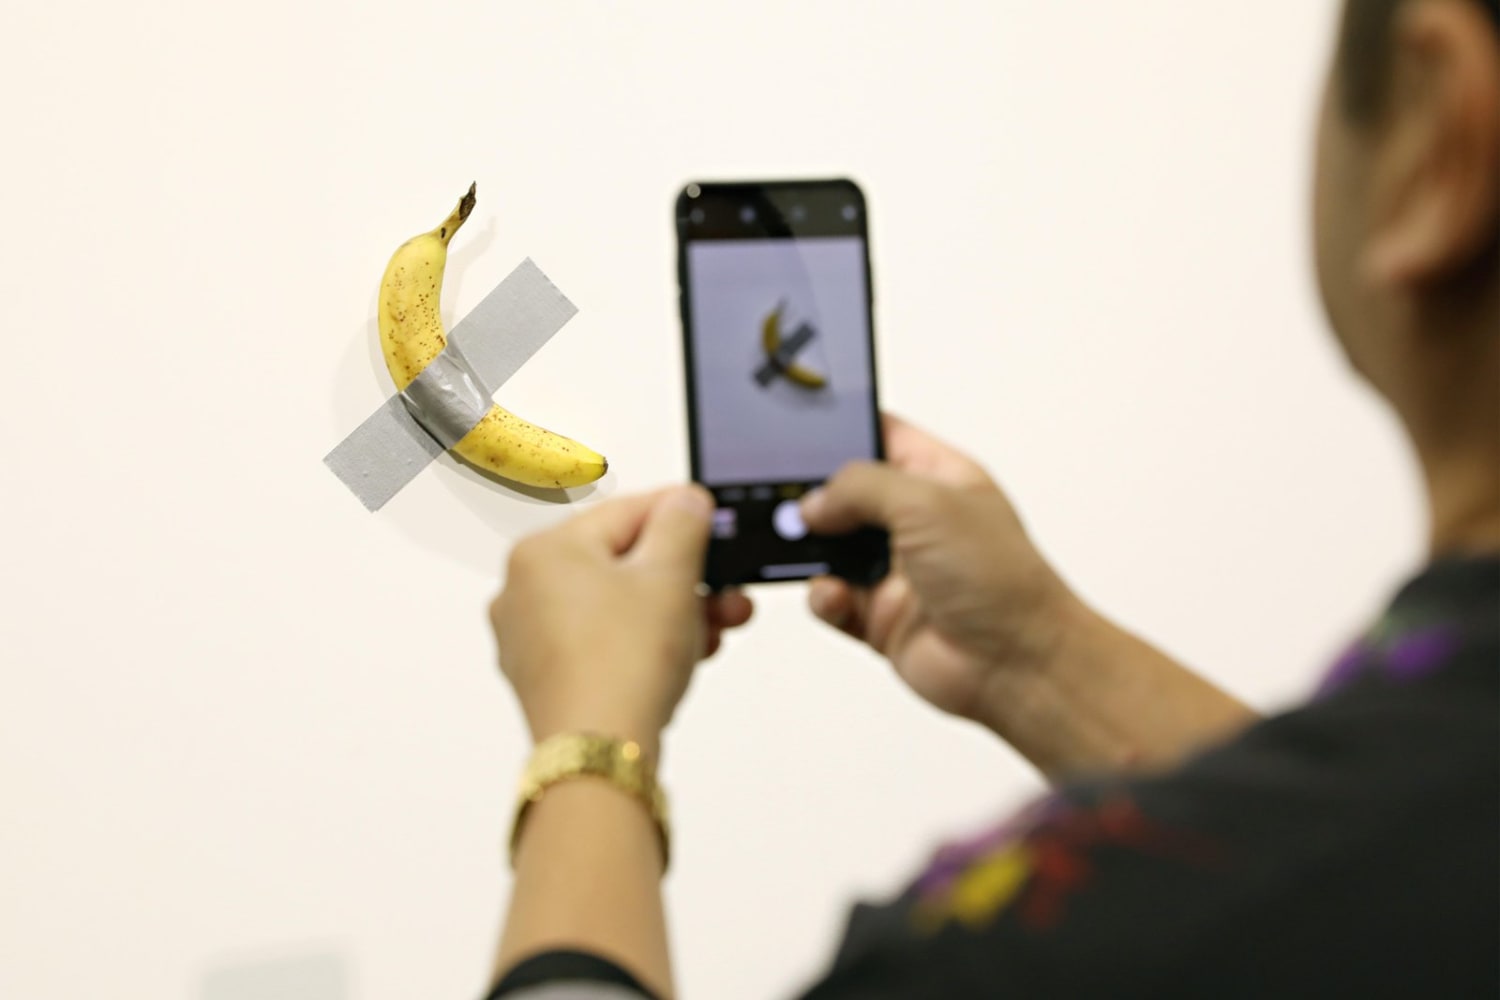 The Infamous Art Basel Banana Is Headed to the Guggenheim